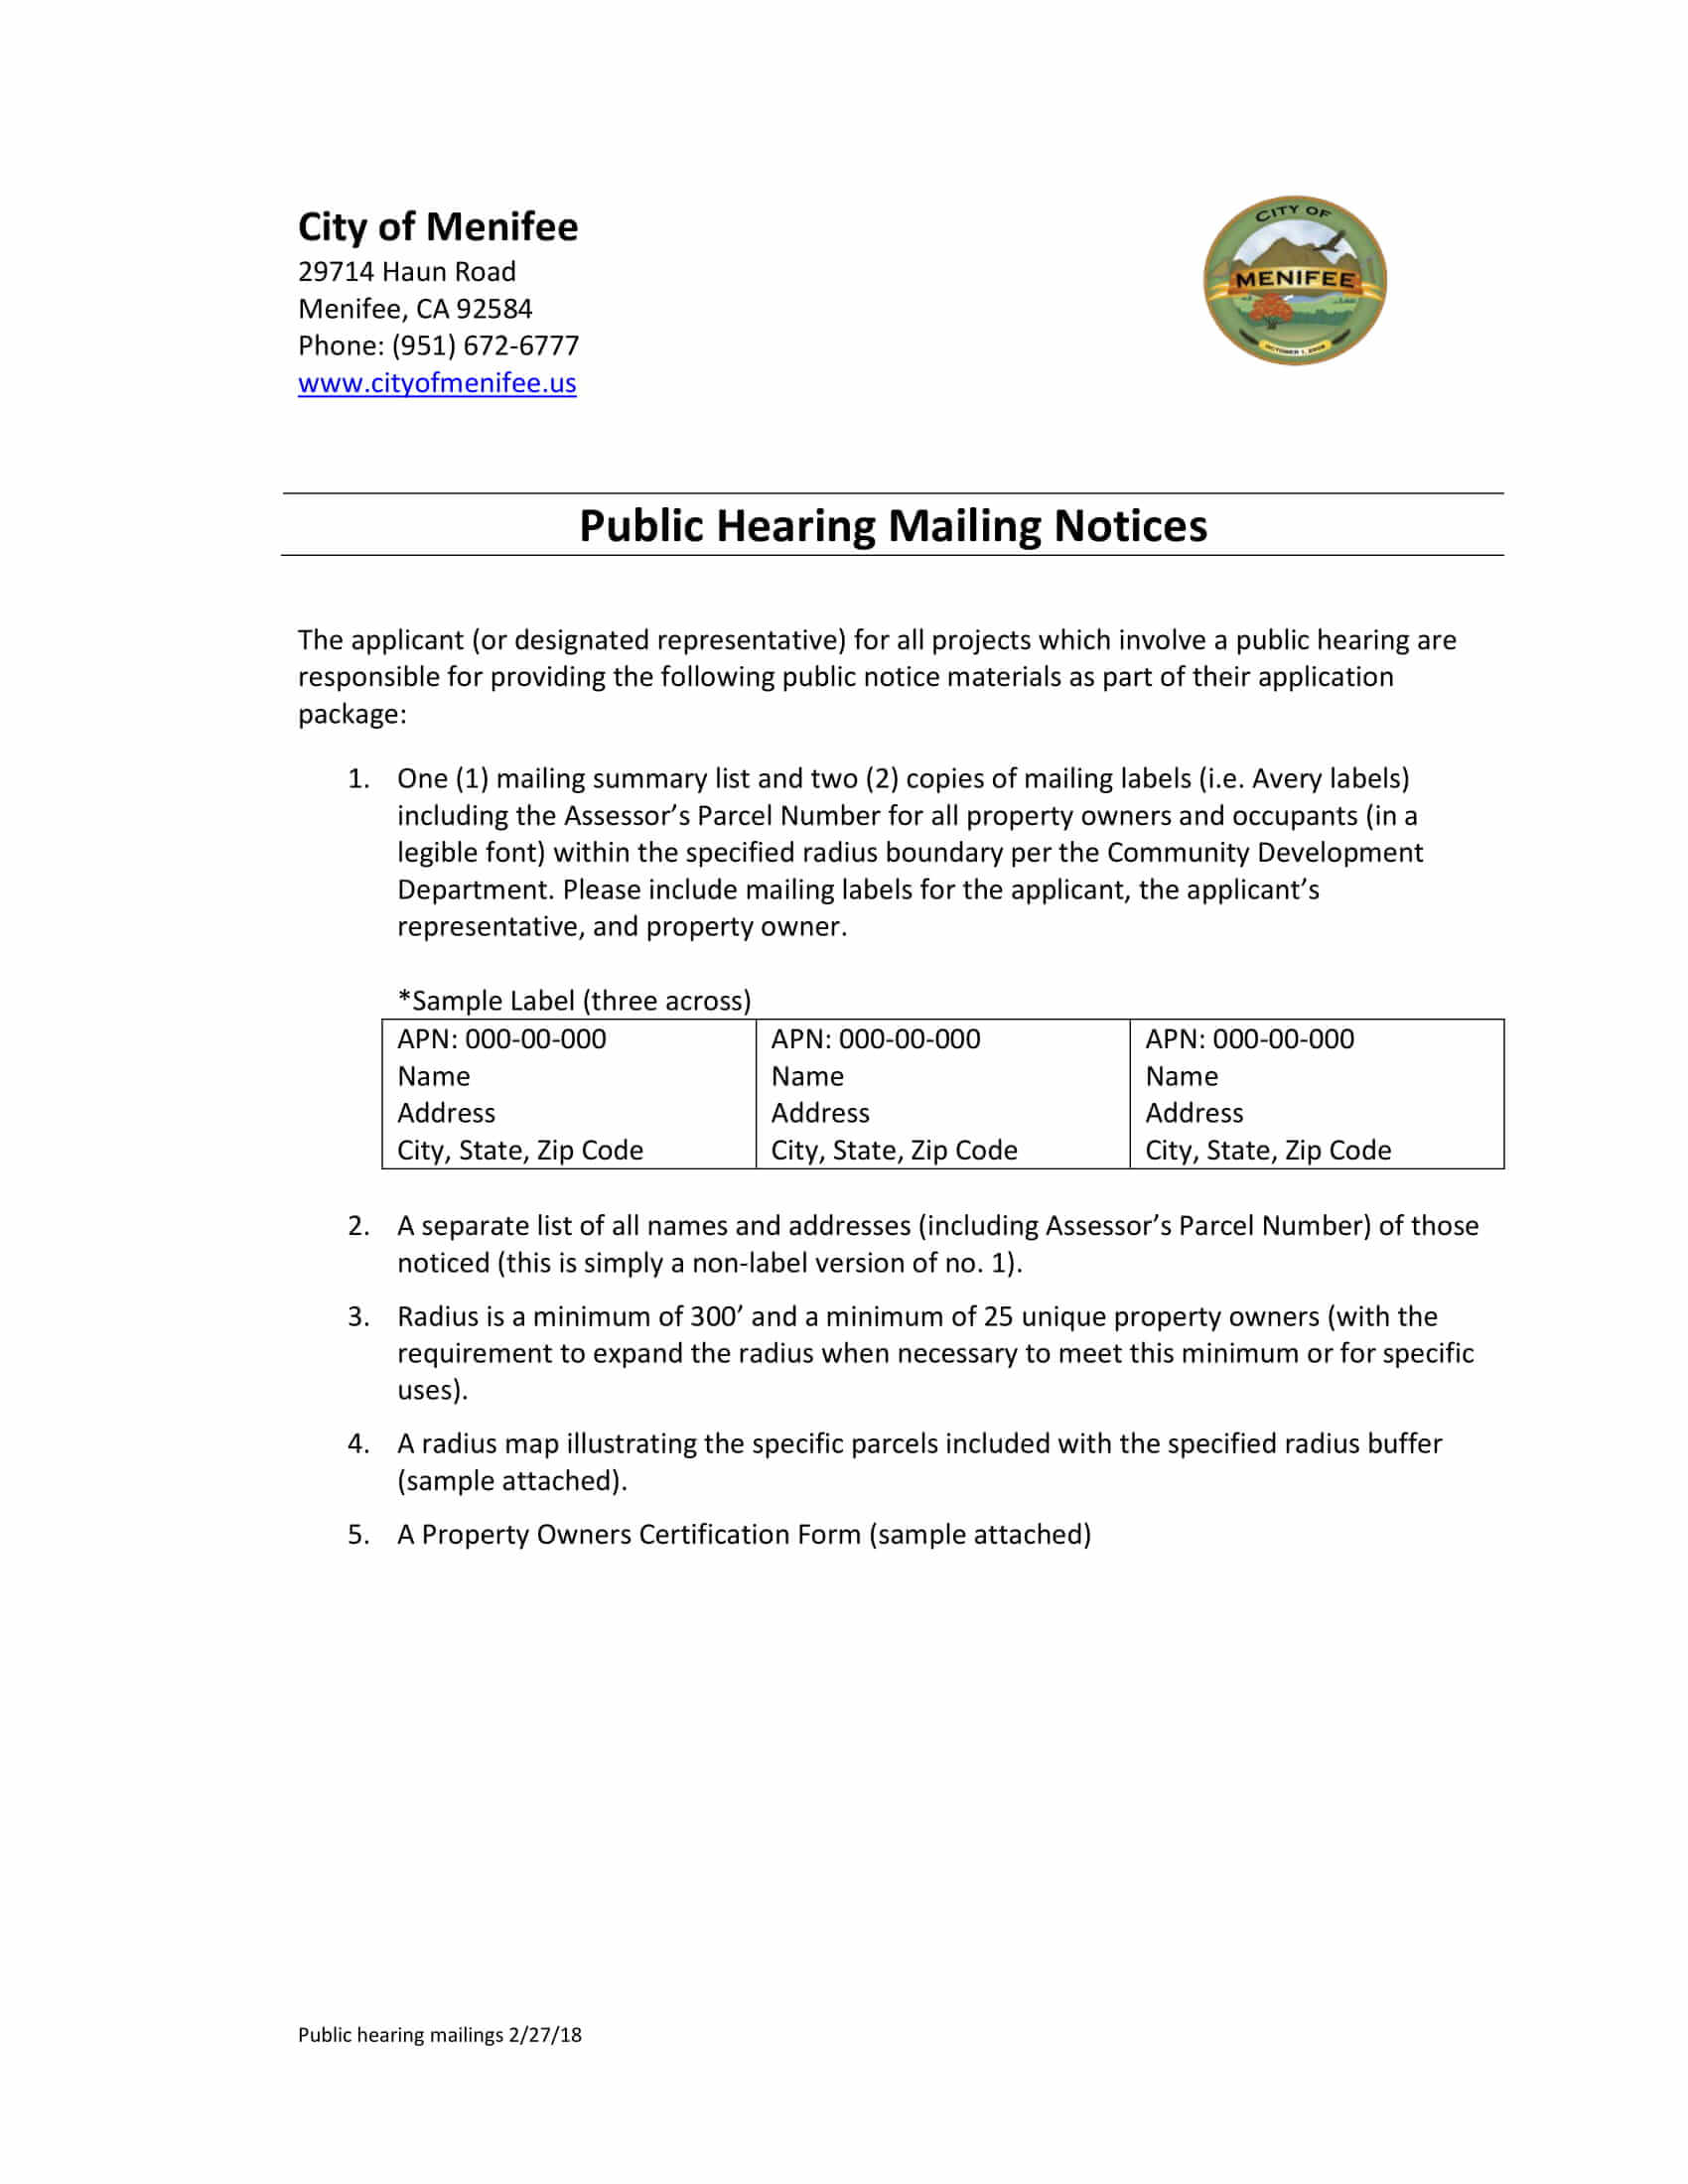 Menifee Public Hearing Mailing Notices. Mailing List Summary Mailing Labels for all property owners and occupants. Radius is a minimum of 300' and a minimum of 25 unique property owners.